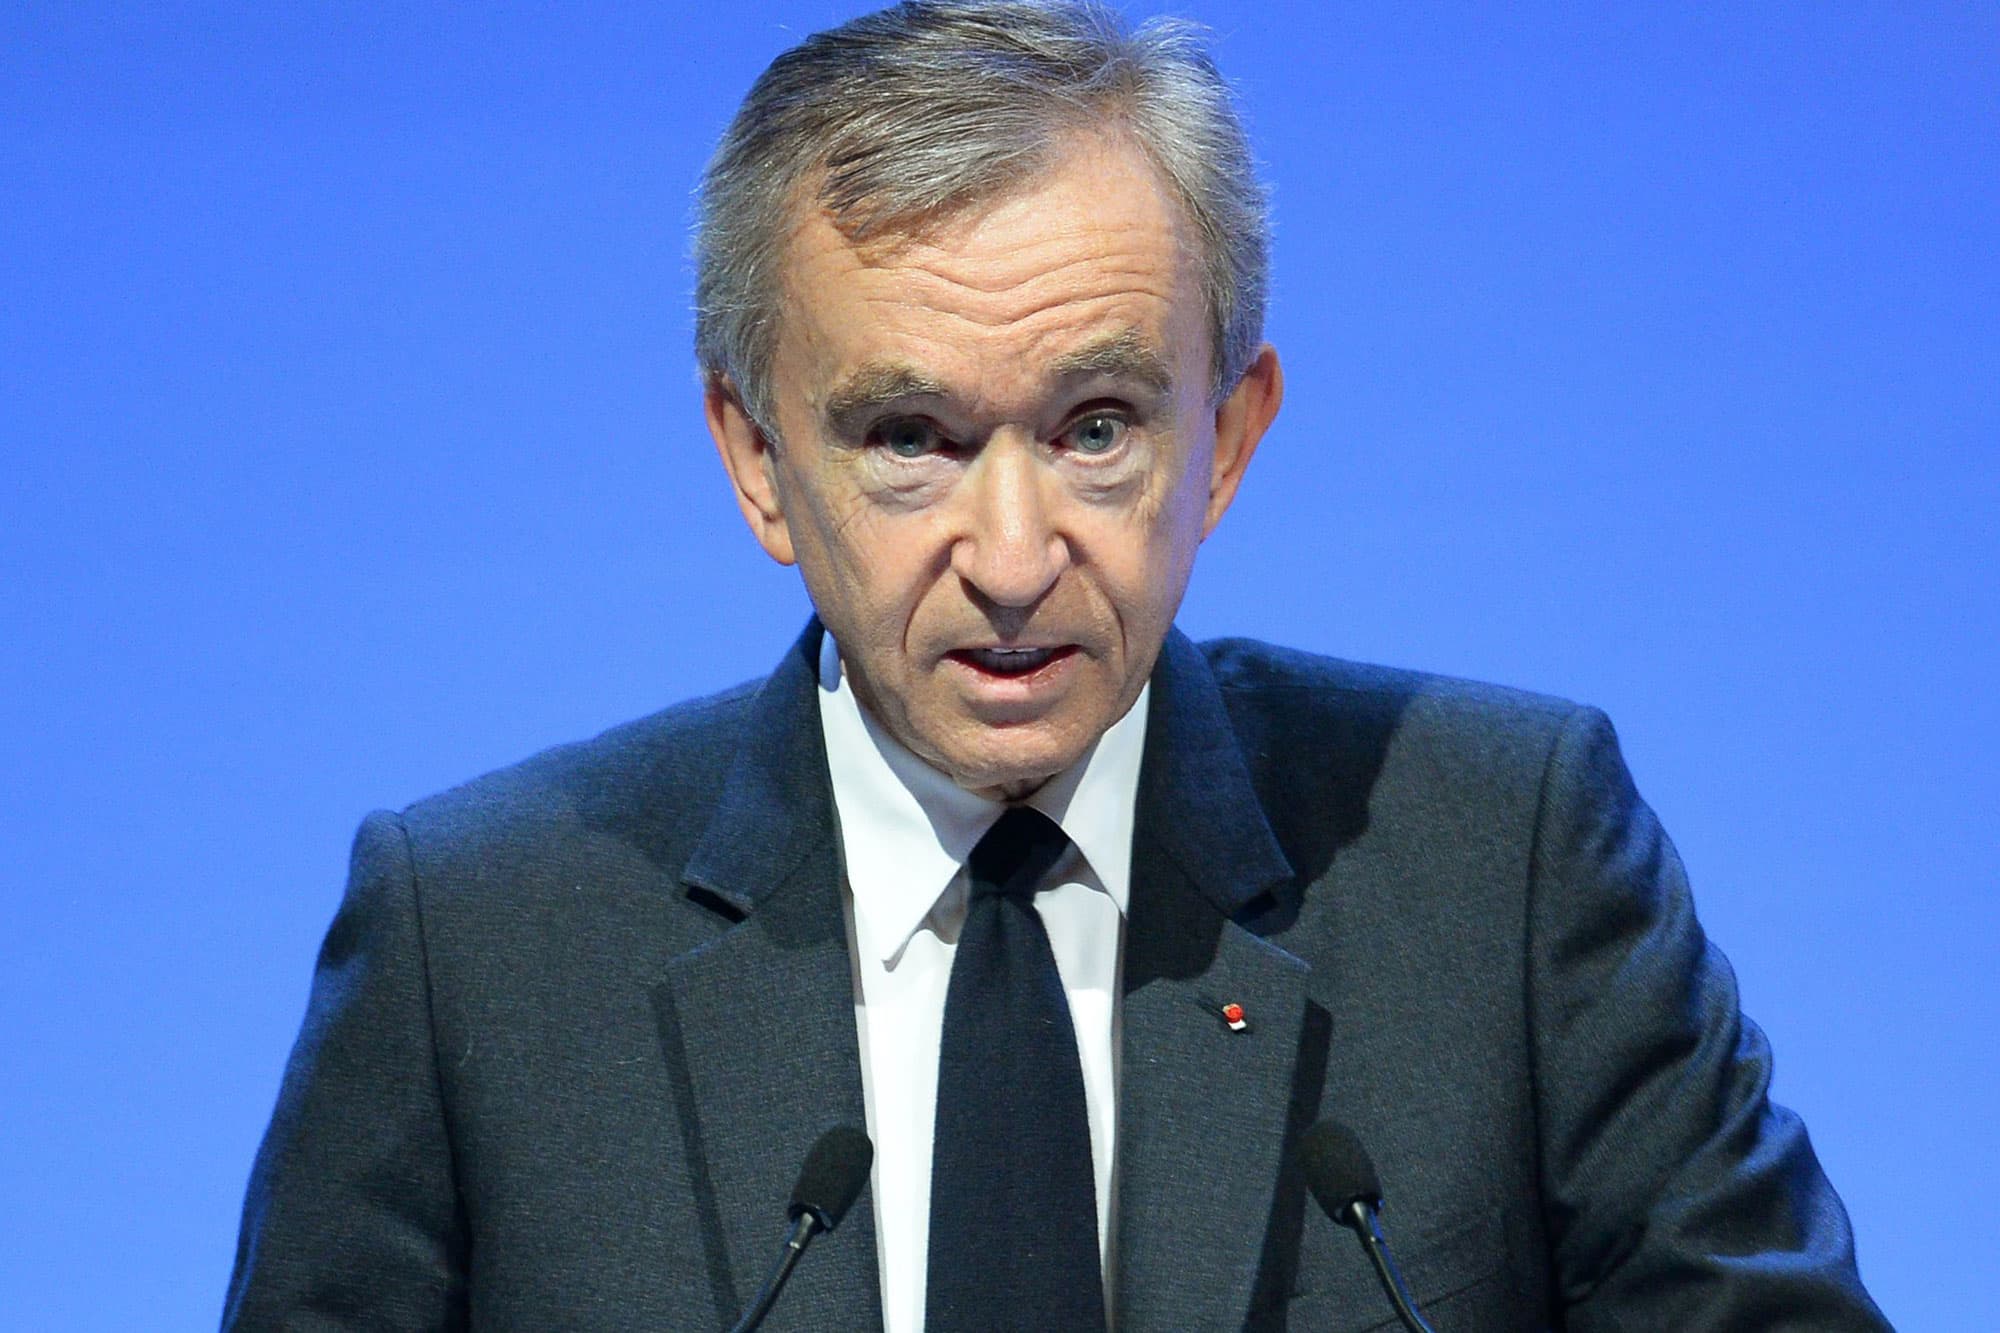 LVMH CEO Arnault says 'we have to be wary of bubbles' with the